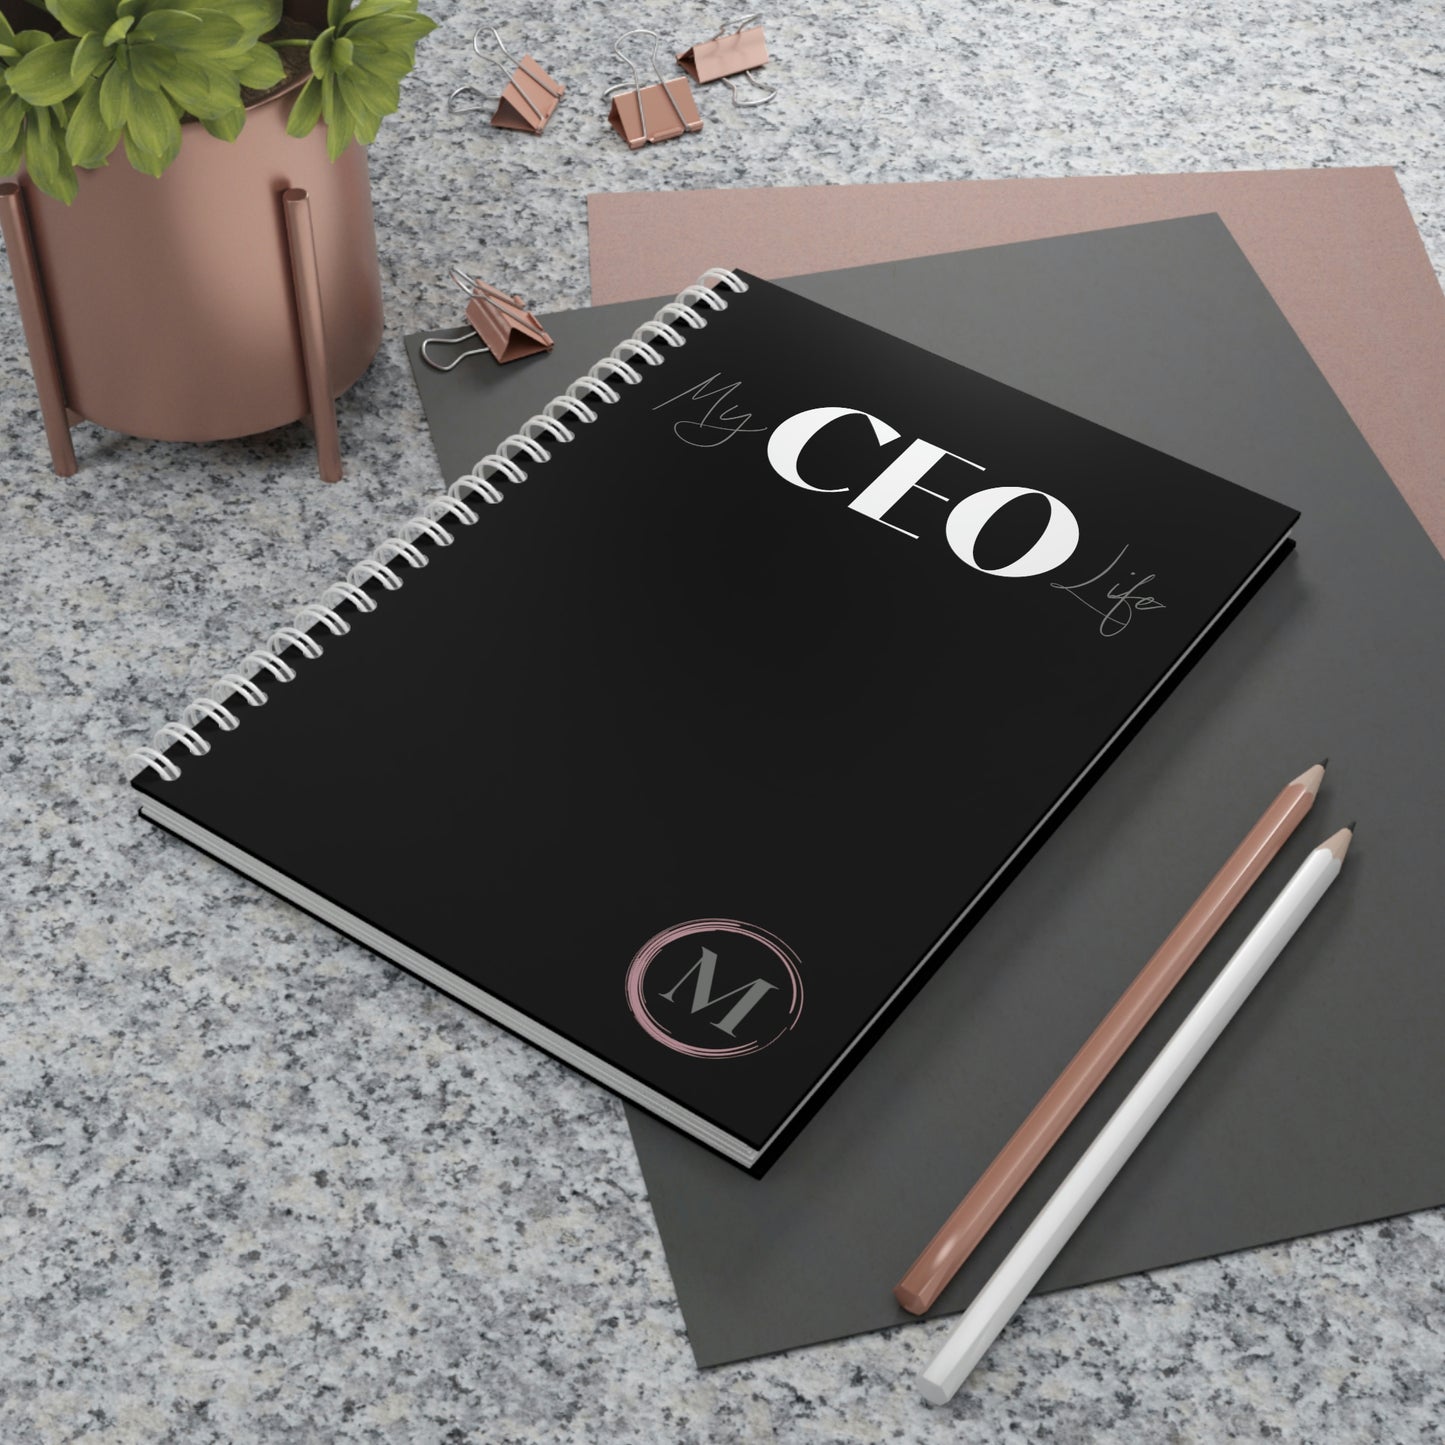 My CEO Life - Wide-ruled - Spiral Notebook - Monogram - M